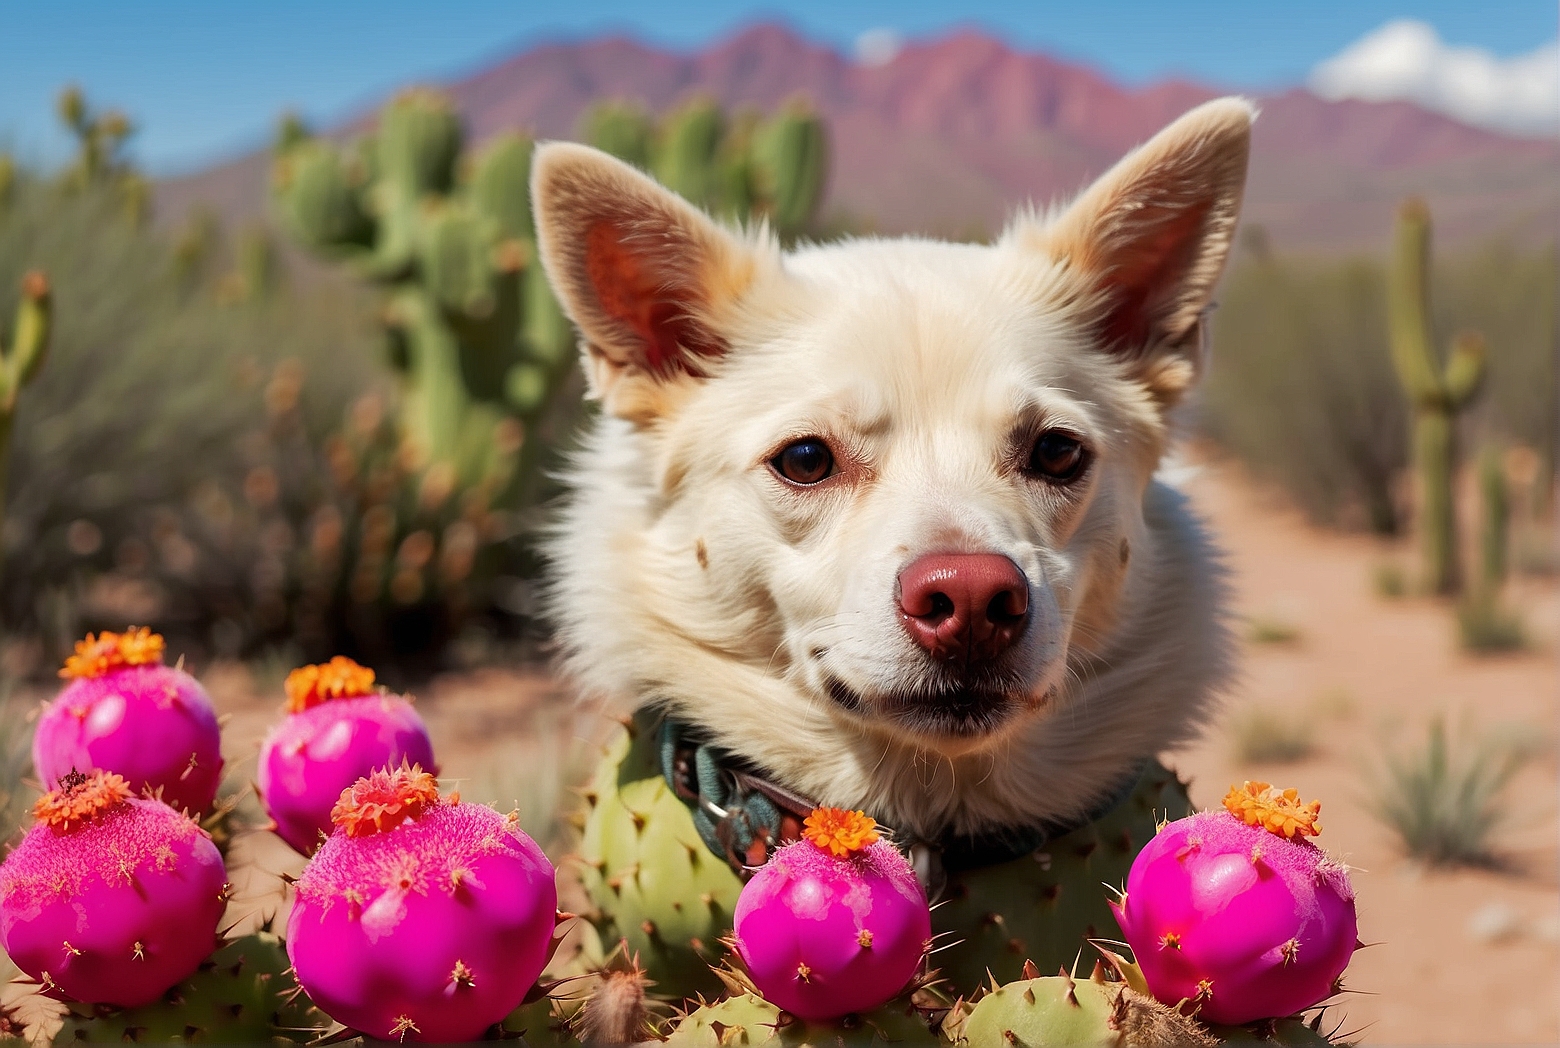 Can Dogs Safely Eat Prickly Pear Cactus?